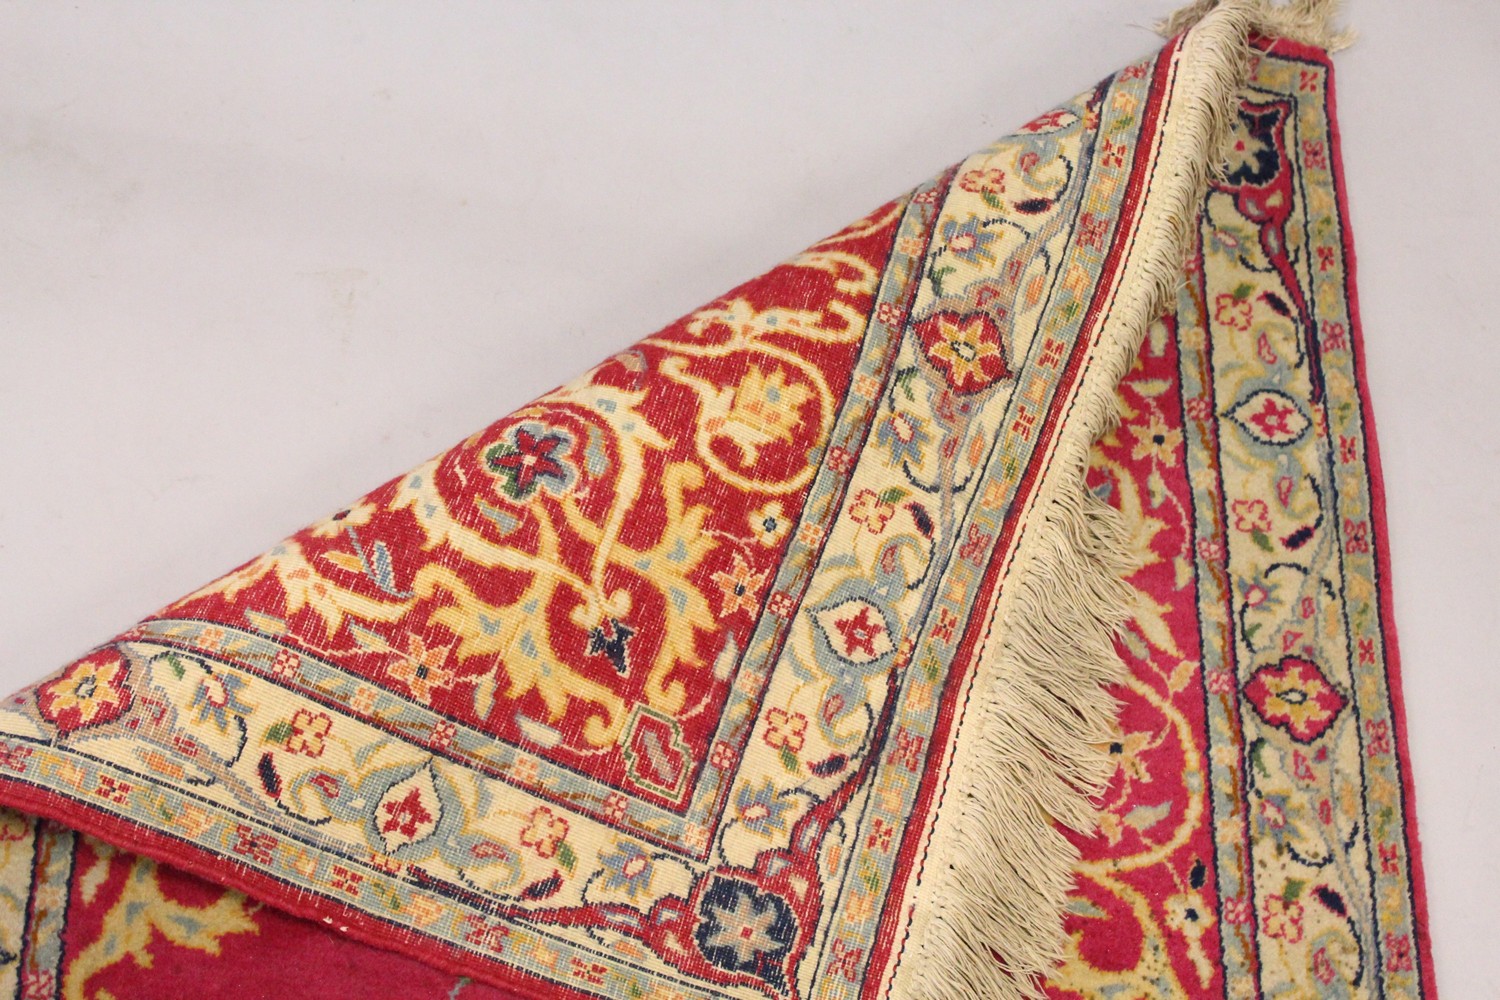 A PERSIAN RUNNER RUG, with central ground, on a rose ground. 6ft 5ins x 3ft. - Image 5 of 6